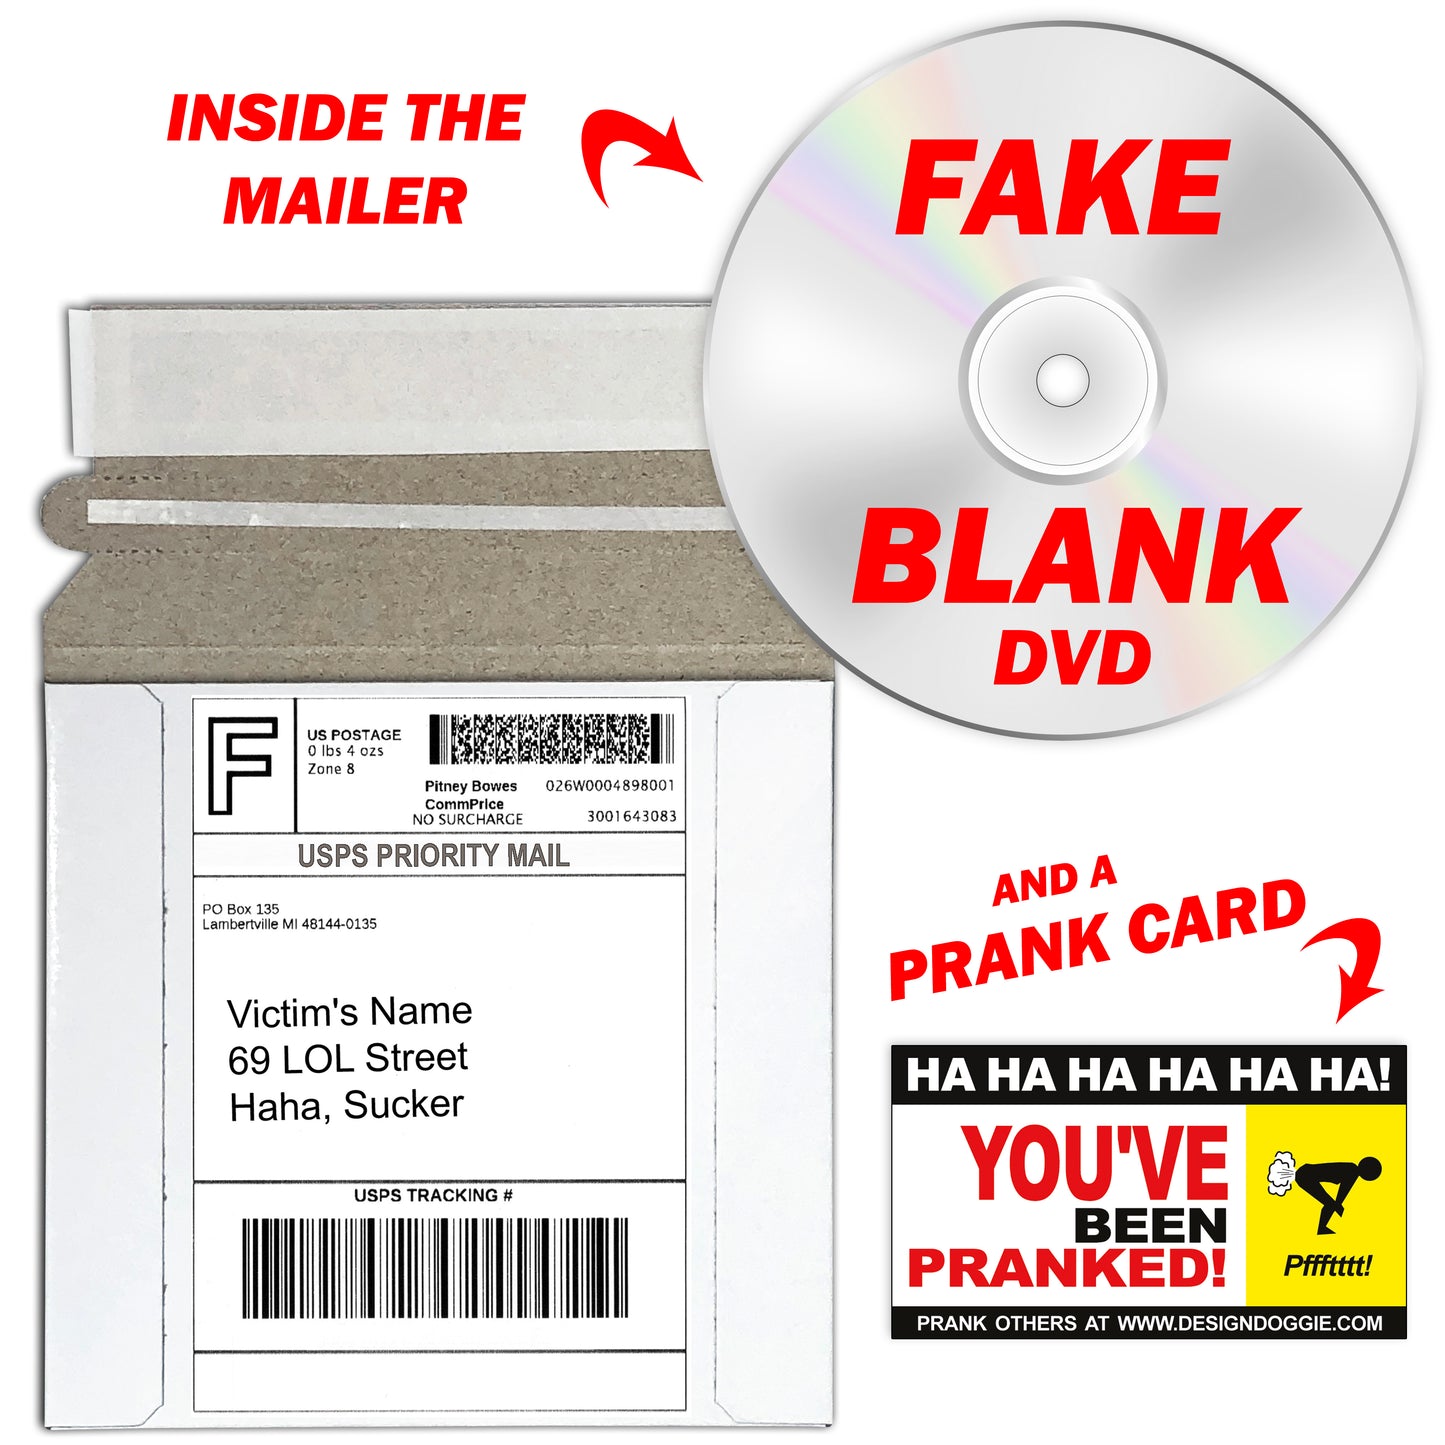 Daddy Issues Fake DVD mail prank gets sent directly to your victims 100% anonymously!